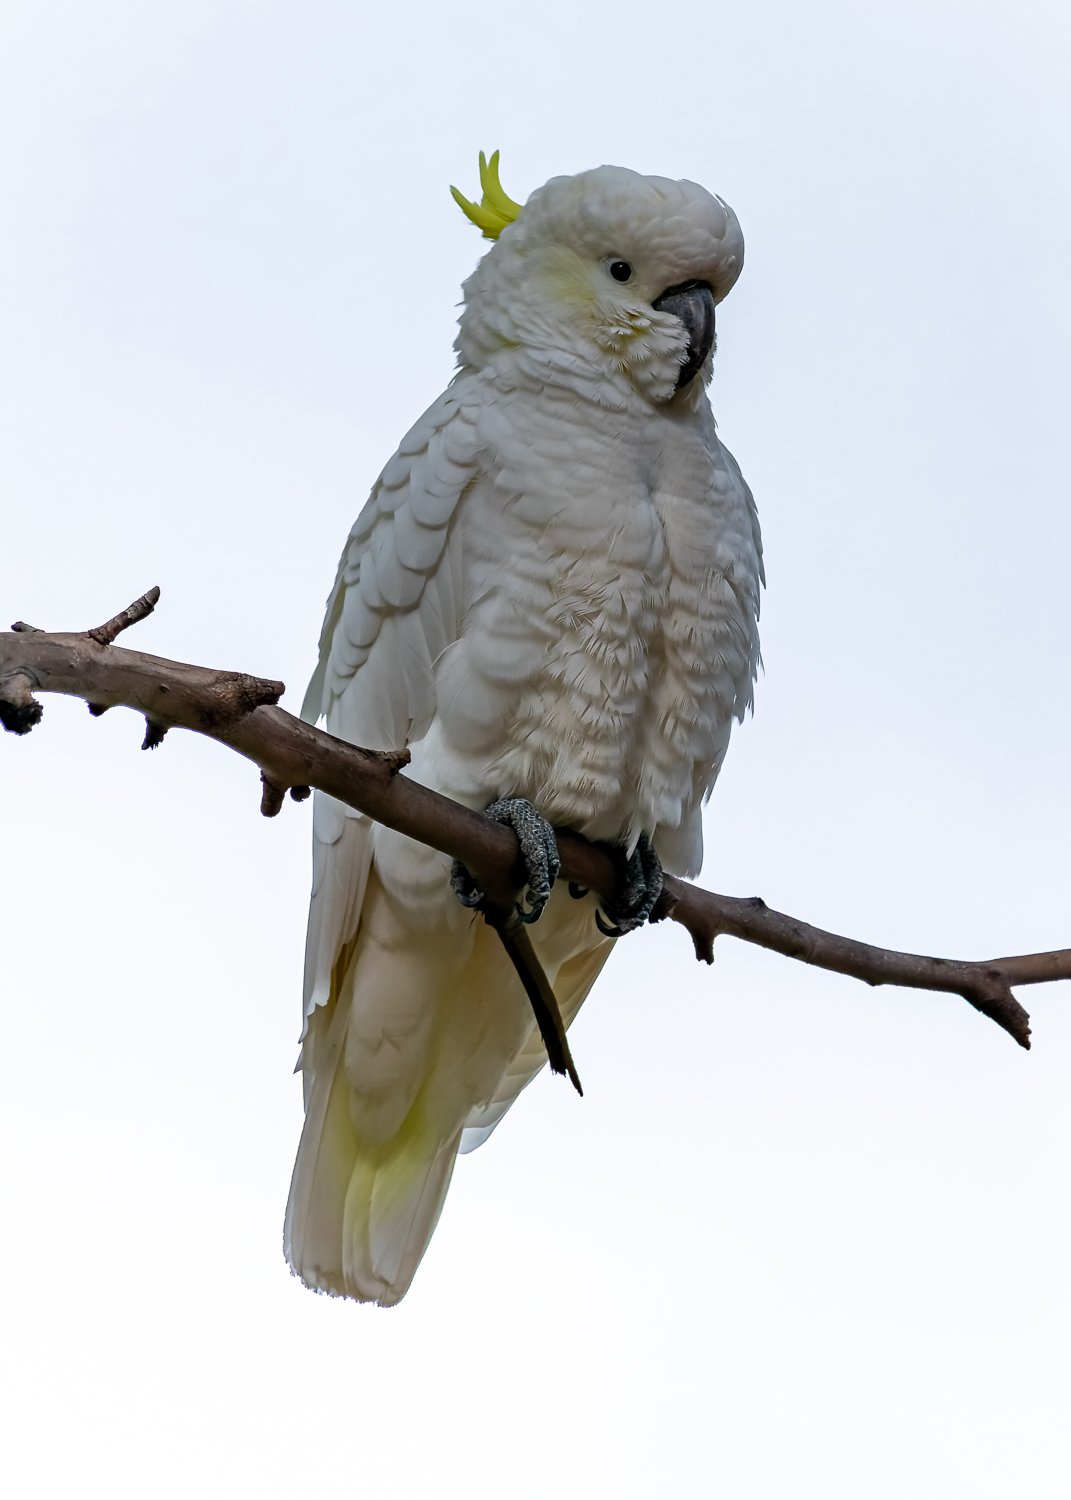 A white sulfur crested cockatoo against a white background, perched on a small tree branch